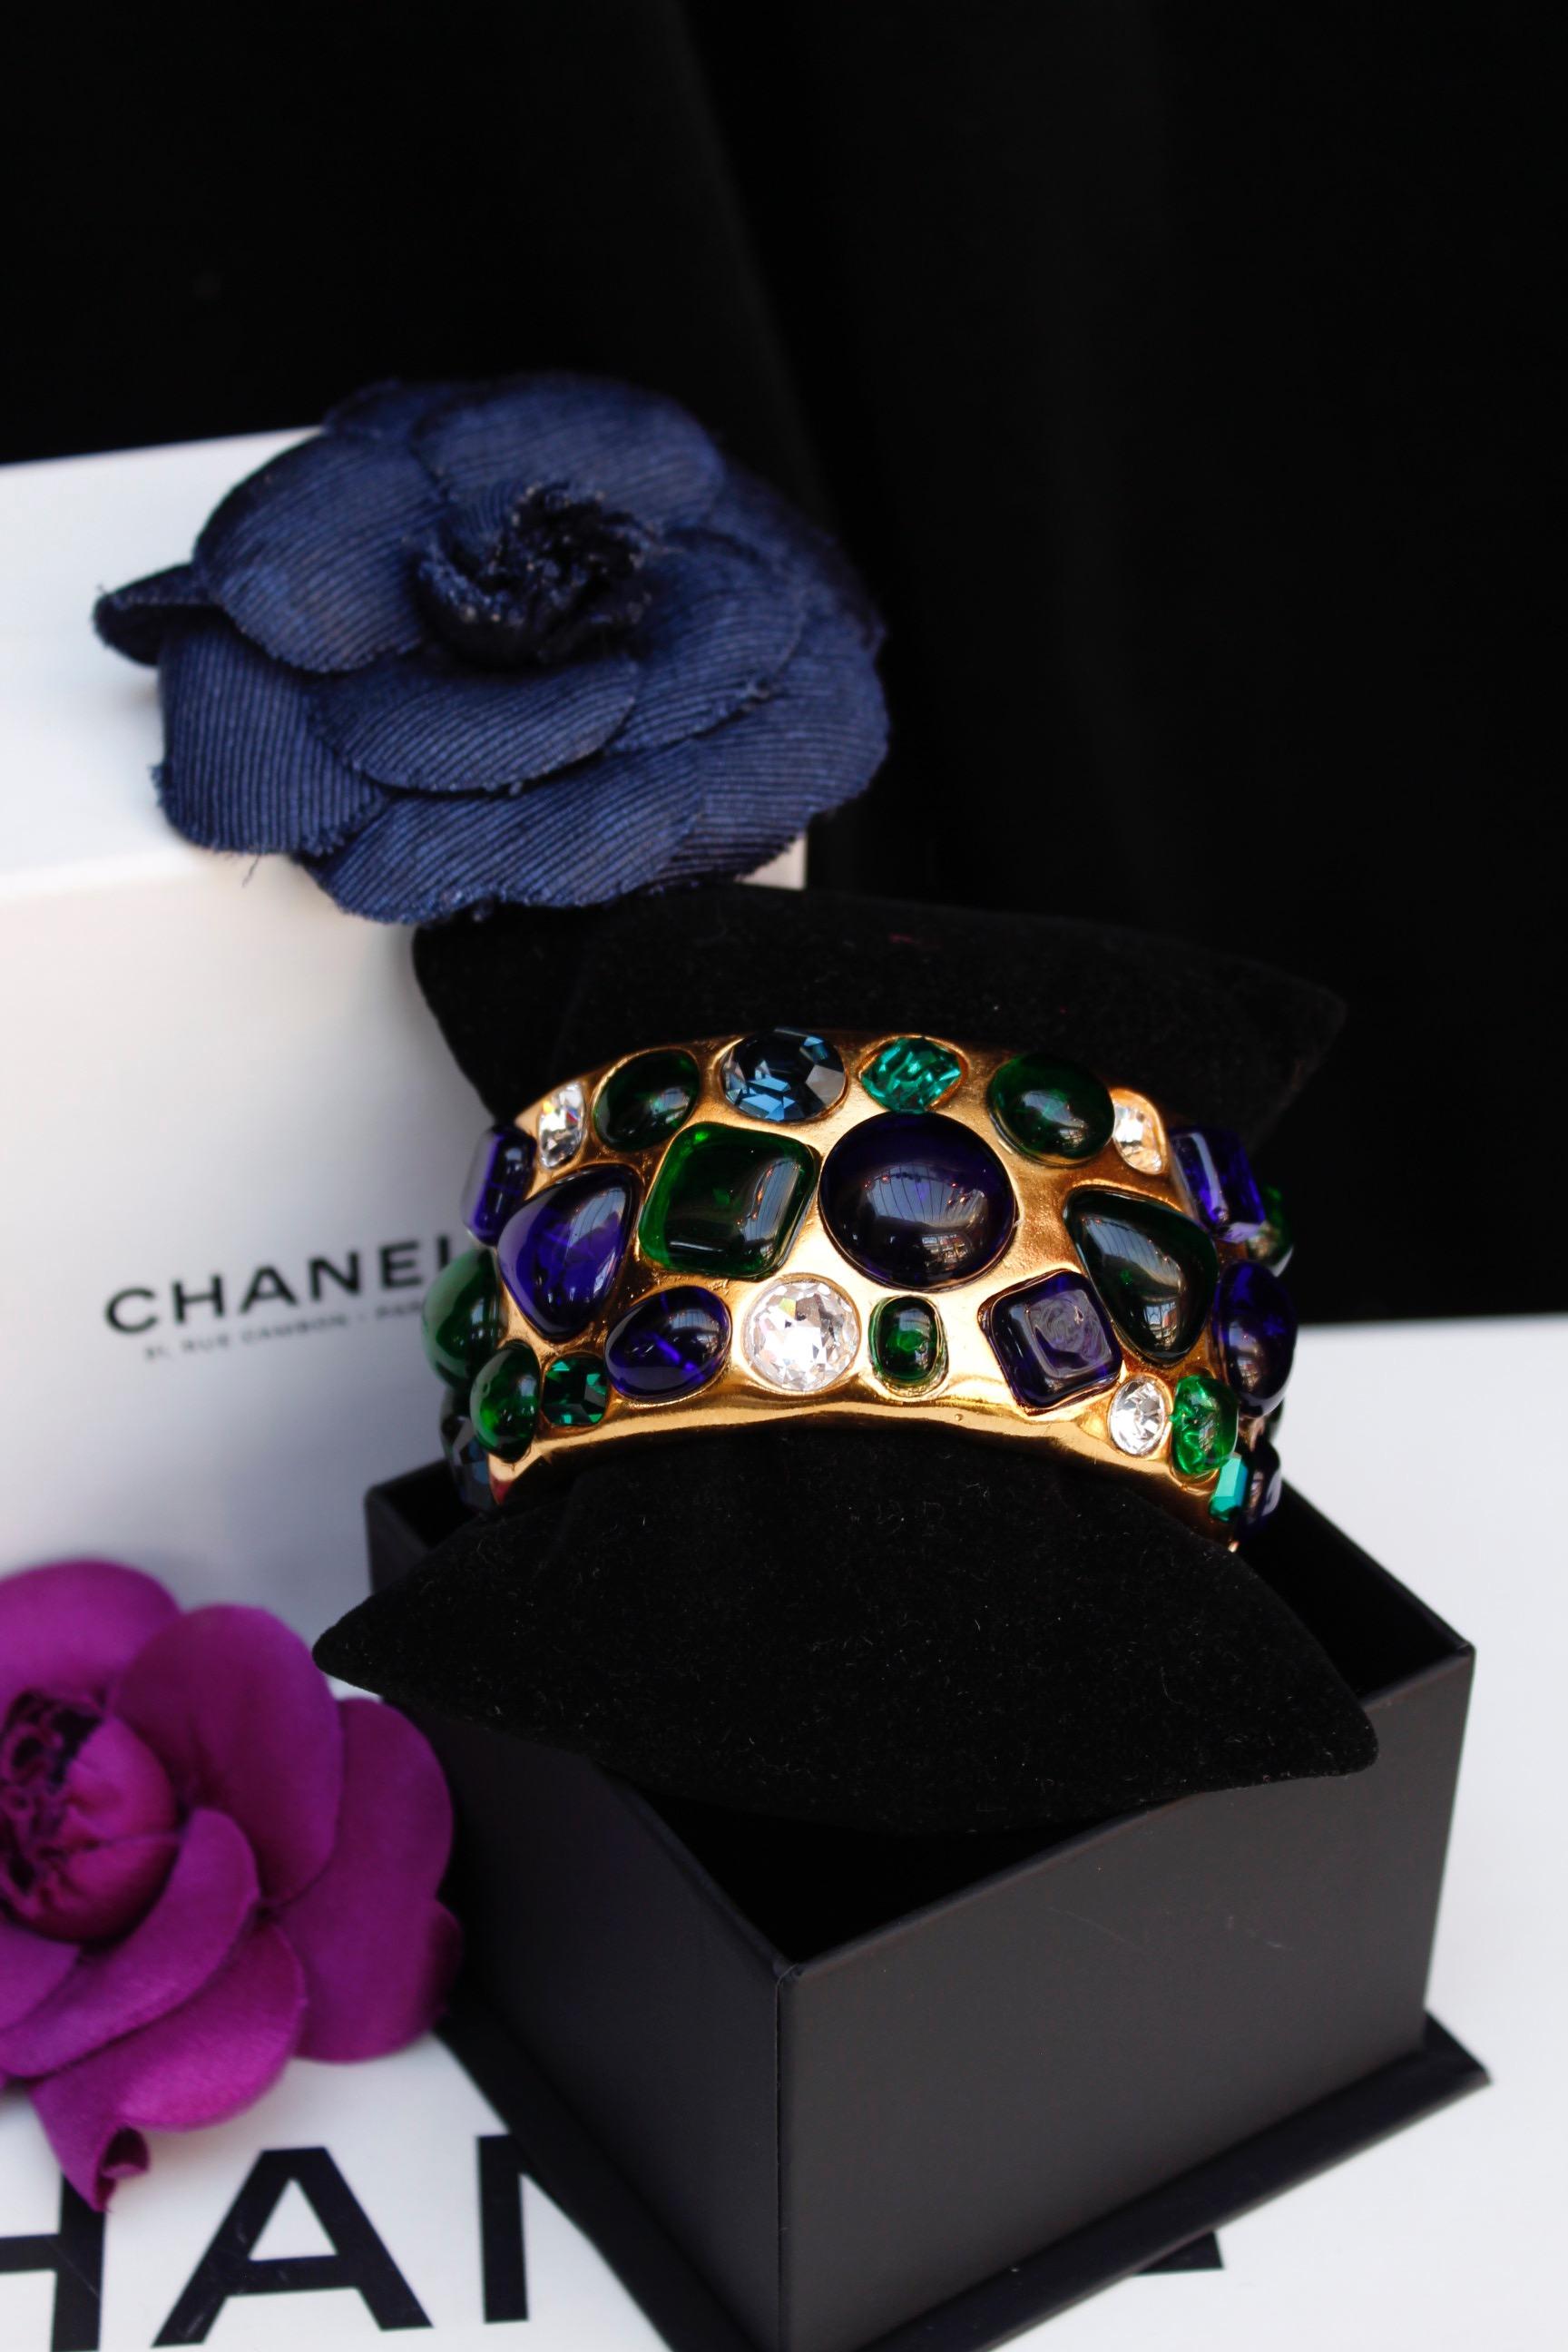 CHANEL (Made in France)
Beautiful and impressive wide gilted metal cuff bracelet adorned by many glass paste cabochons in blue and green colors. It's also decorated by faceted rhinestones in blue, green and white colors.

Signed on a plate at the